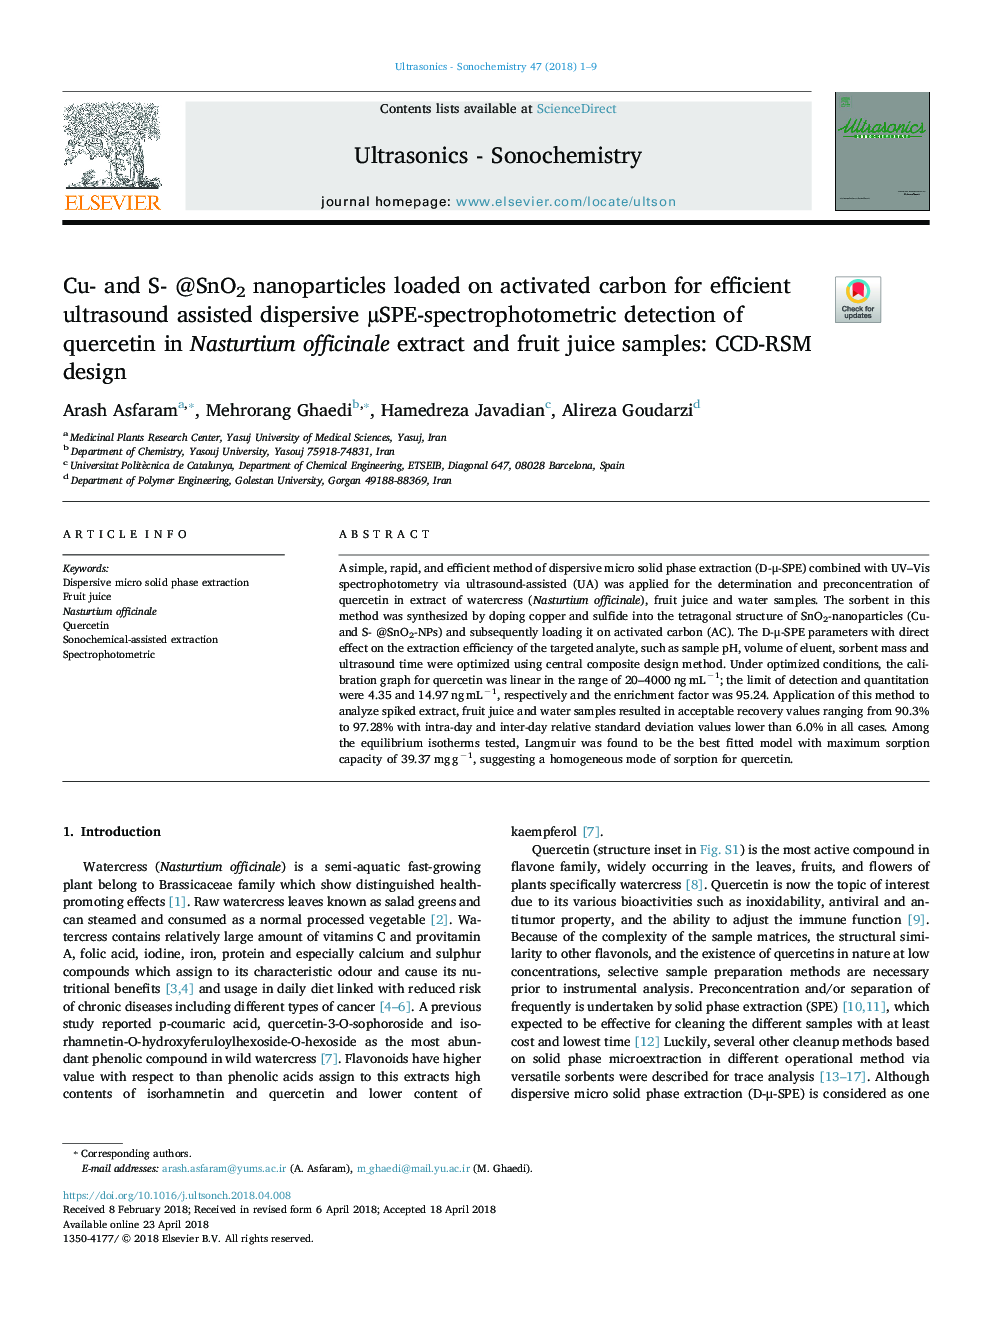 Cu- and S- @SnO2 nanoparticles loaded on activated carbon for efficient ultrasound assisted dispersive ÂµSPE-spectrophotometric detection of quercetin in Nasturtium officinale extract and fruit juice samples: CCD-RSM design